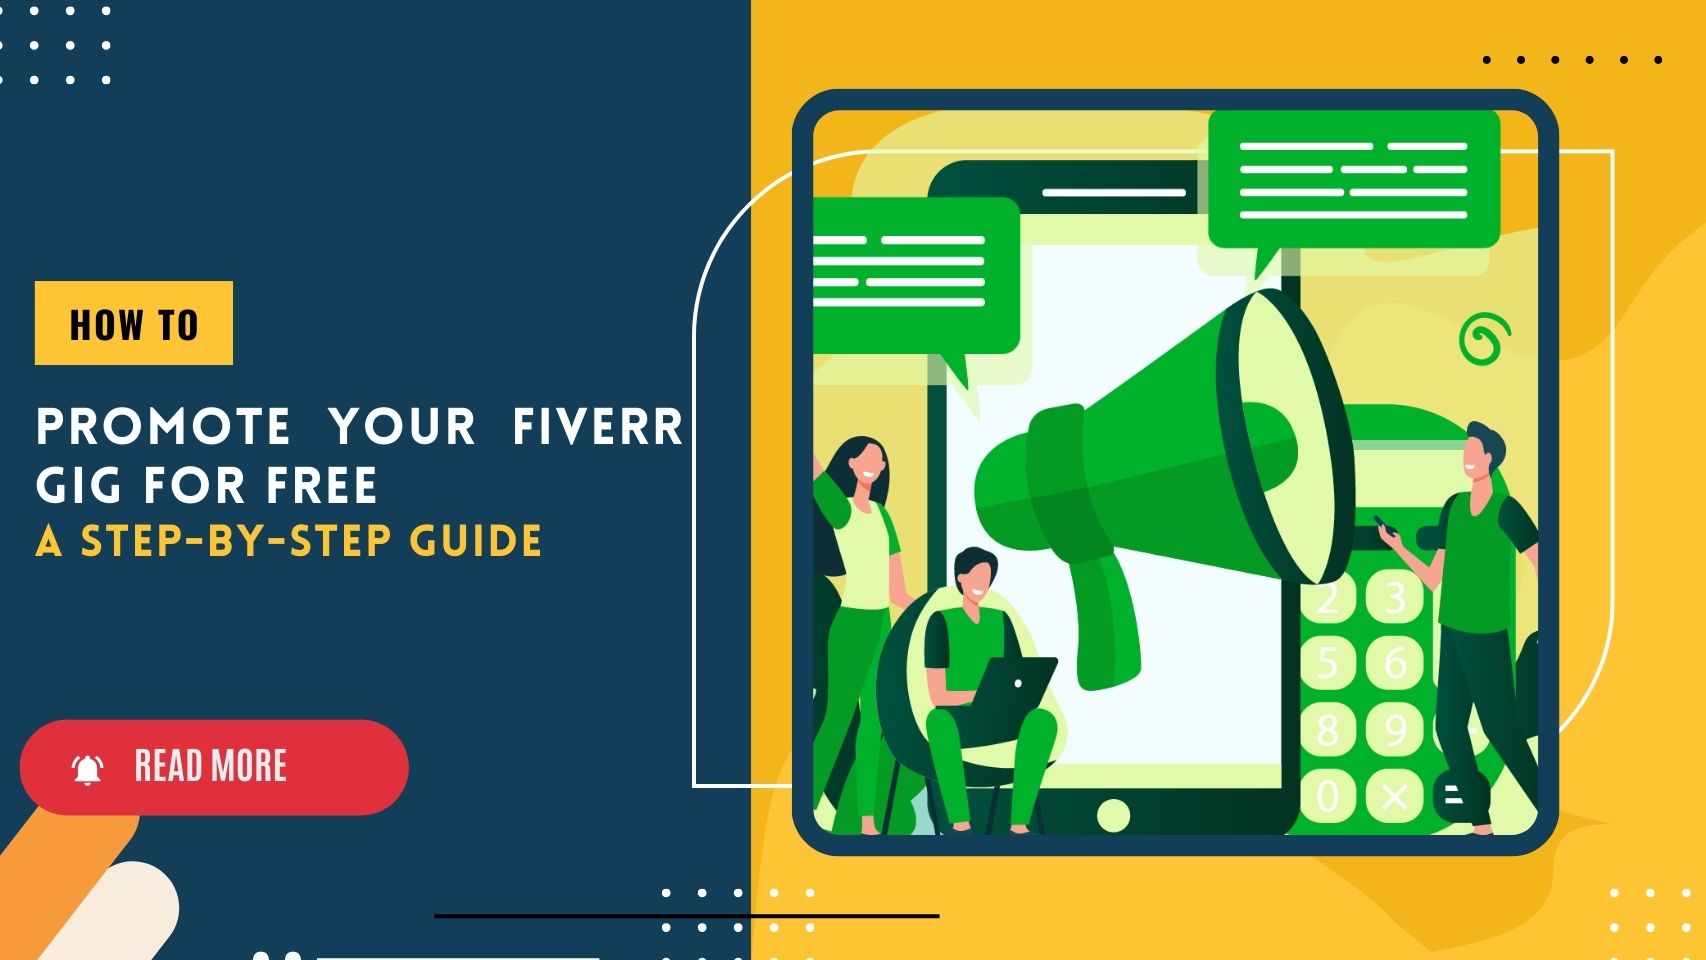 How to Promote Your Fiverr Gig for Free: A Step-by-Step Guide